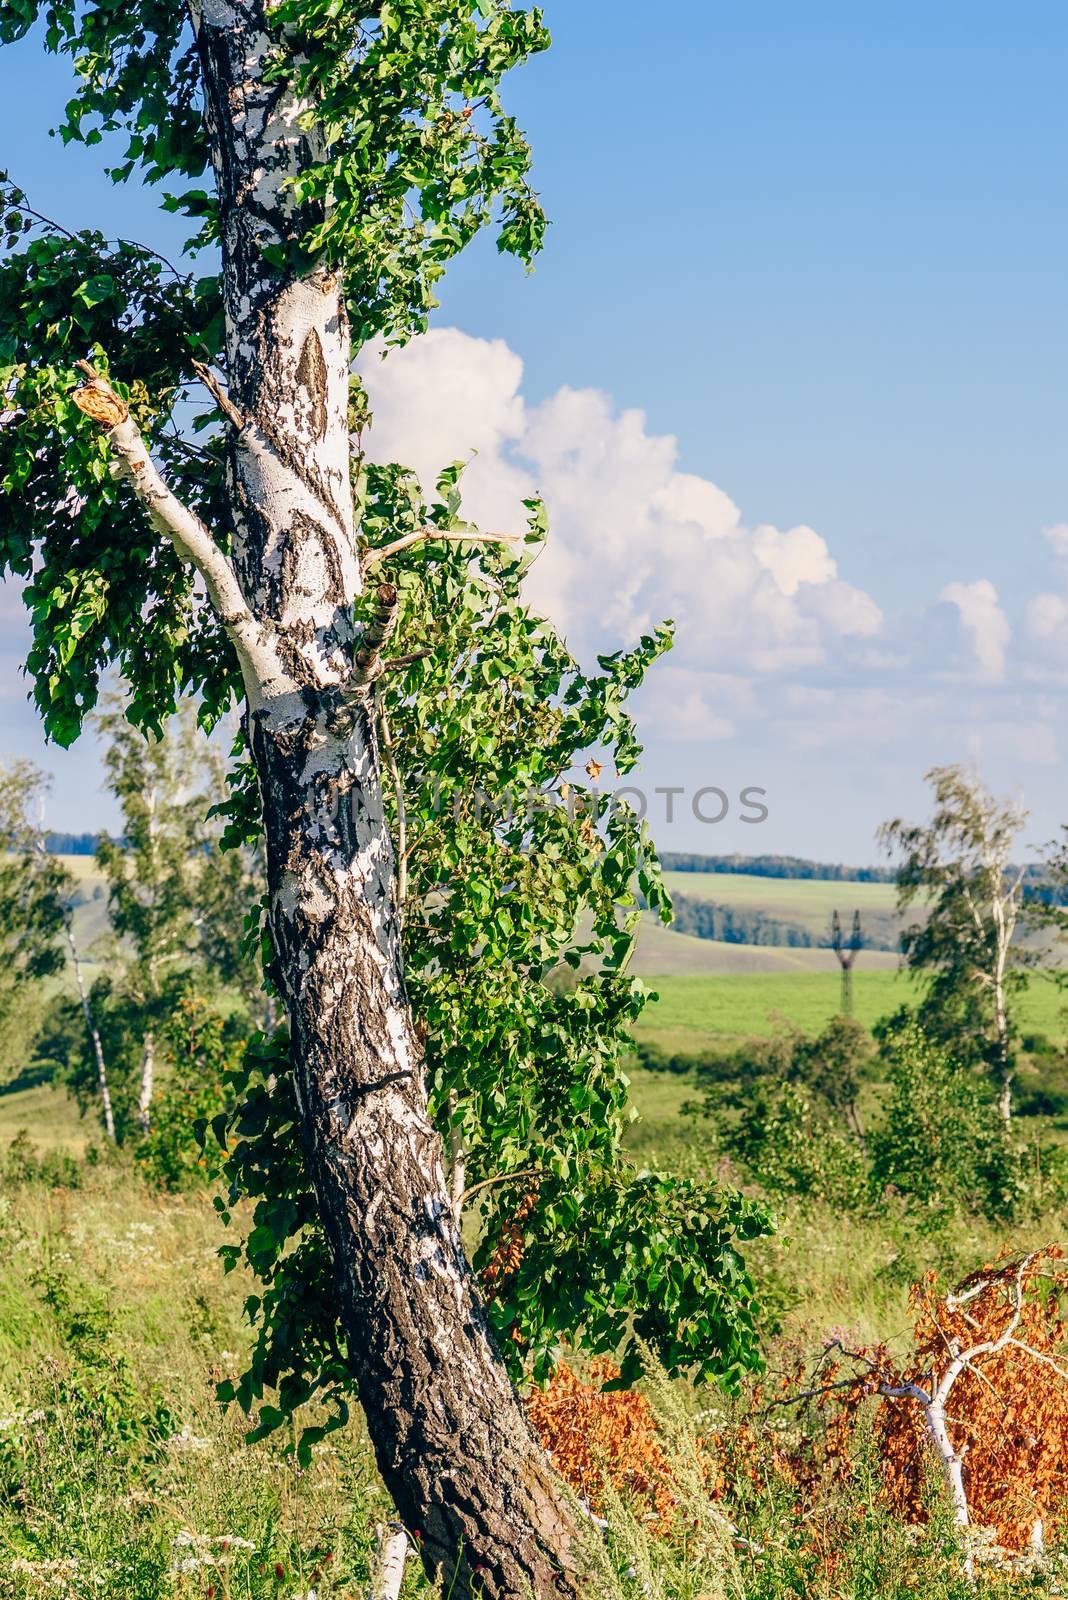 Lonely Birch Tree with Broken Trunk and Branches on Meadow with Flowers.